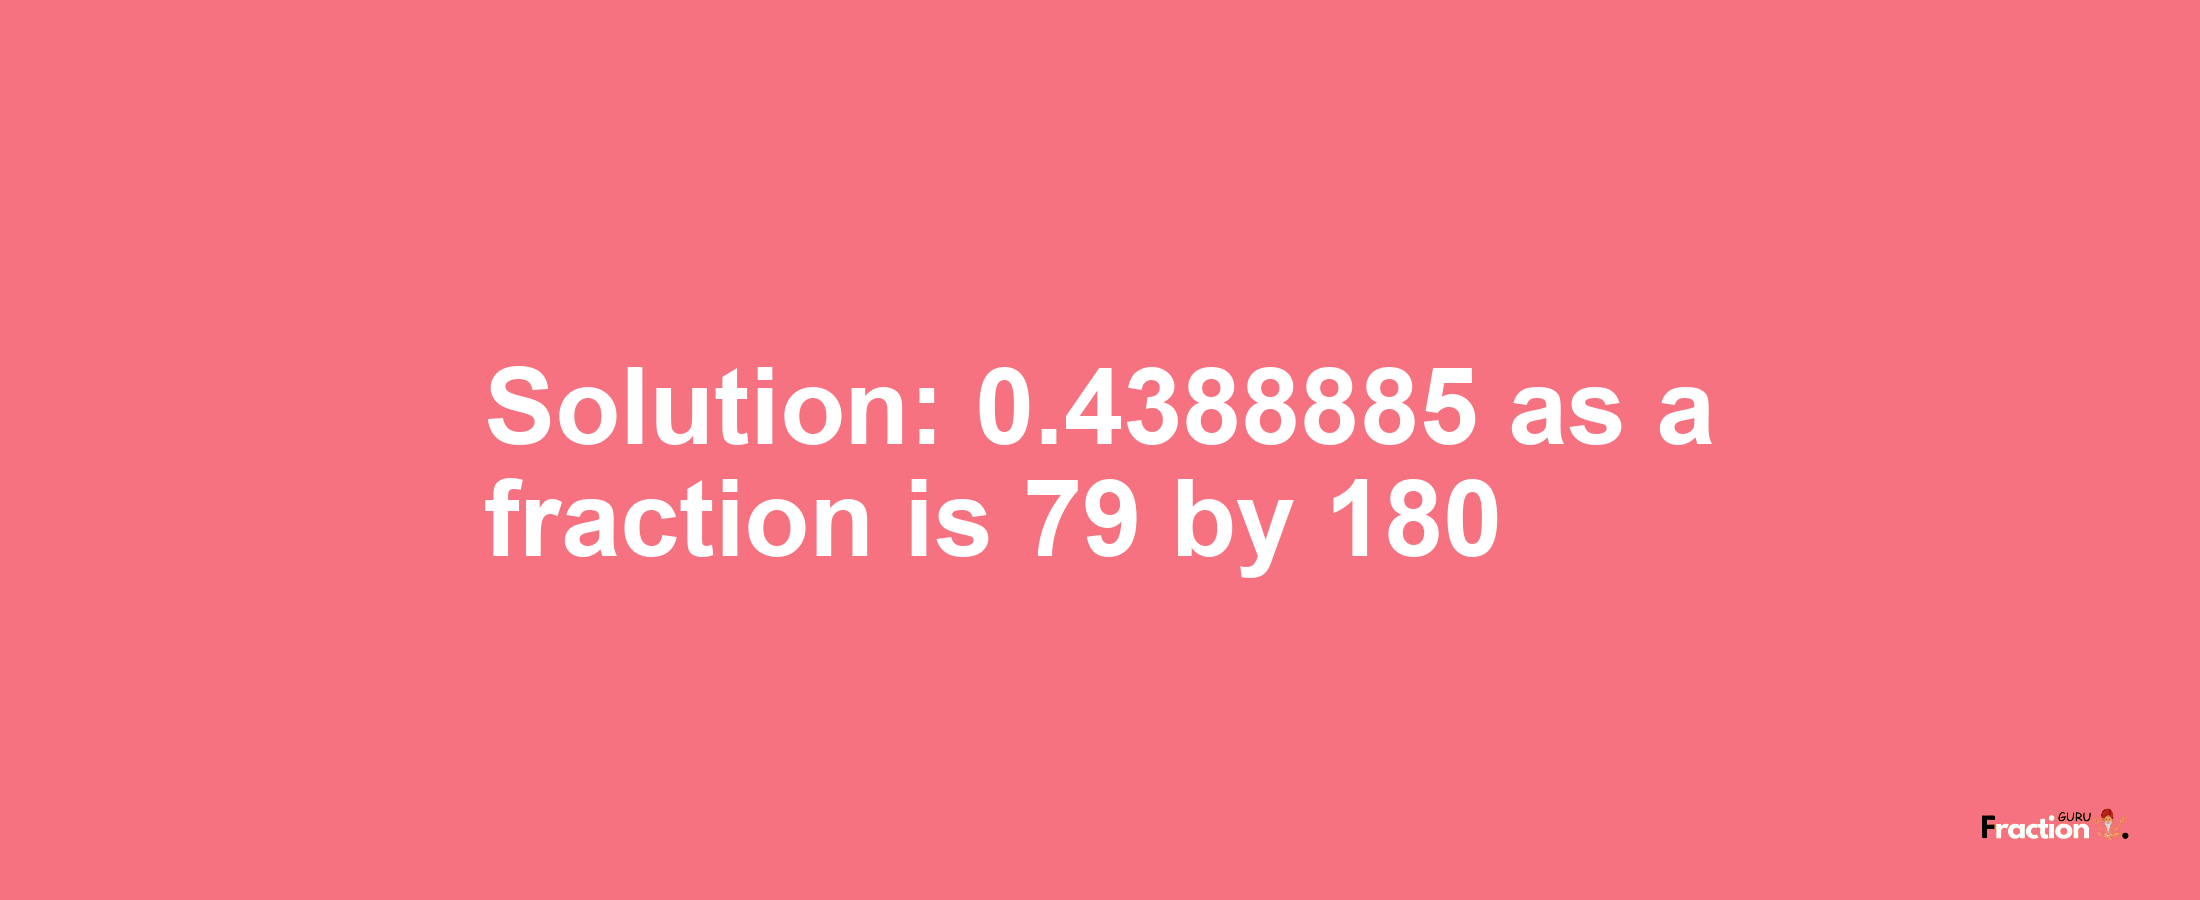 Solution:0.4388885 as a fraction is 79/180